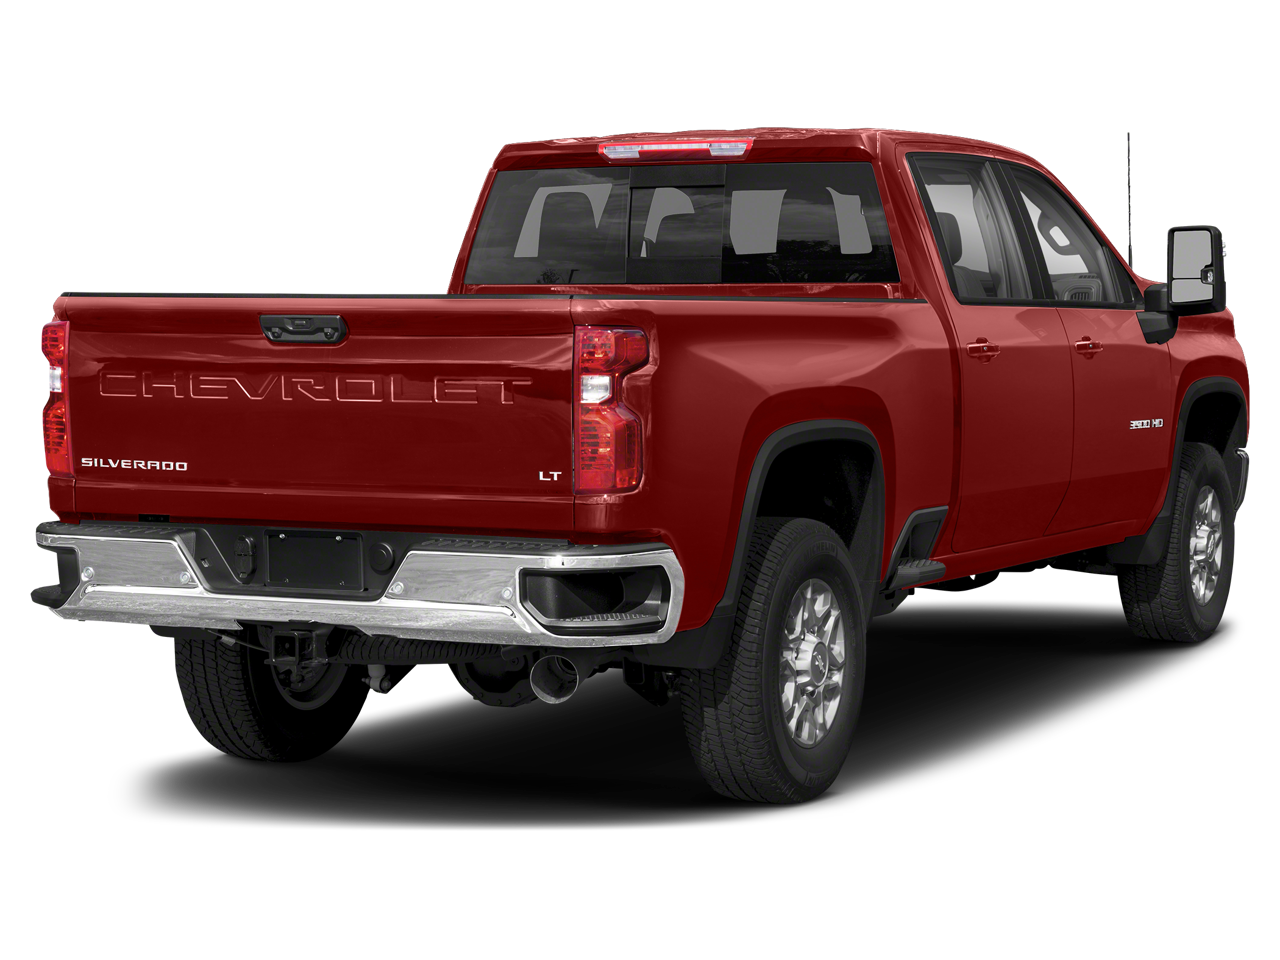 Used 2021 Chevrolet Silverado 3500HD LT with VIN 1GC4YTEY4MF201669 for sale in Marshall, Minnesota